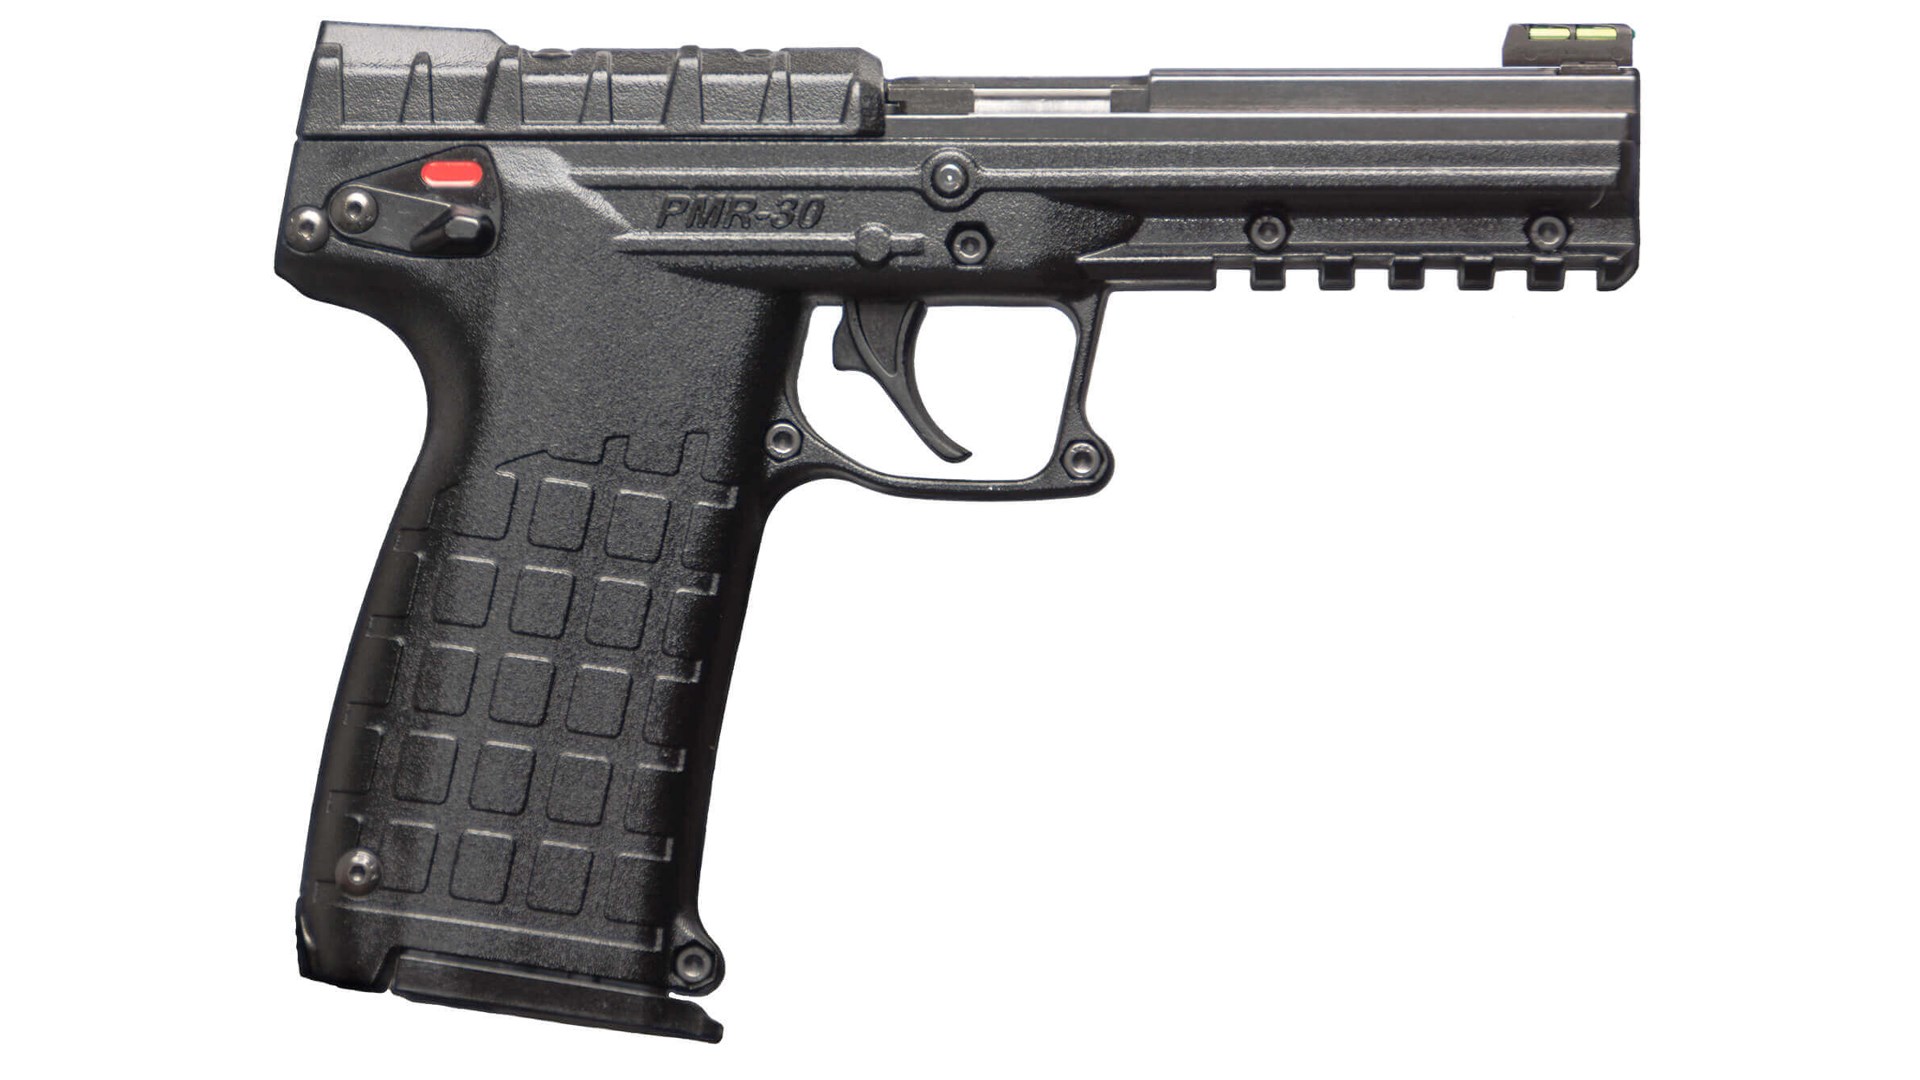 Keltec PMR30 .22 WMR semi-automatic pistol right-side view shown on white handgun with optic-ready slide picatinny rail fiber-optic sights grenade texture grip right-side safety lever red indicator showing